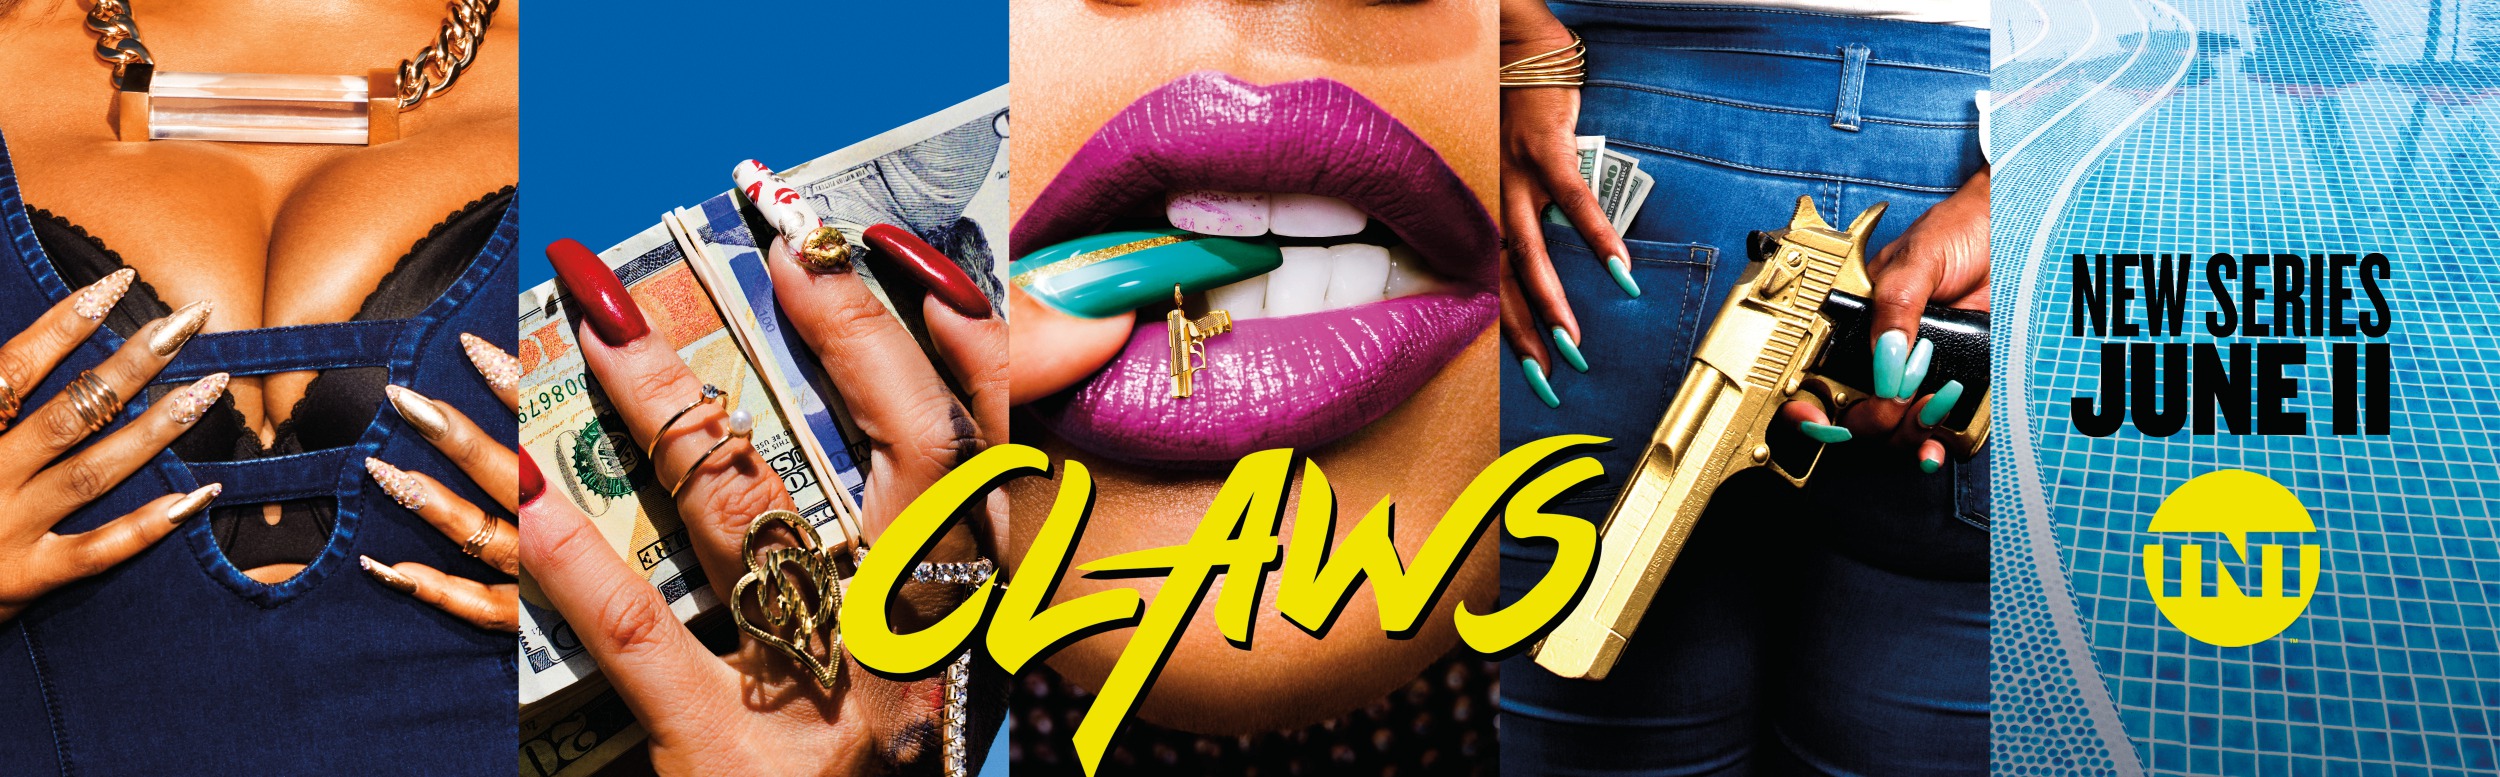 Mega Sized TV Poster Image for Claws (#2 of 6)